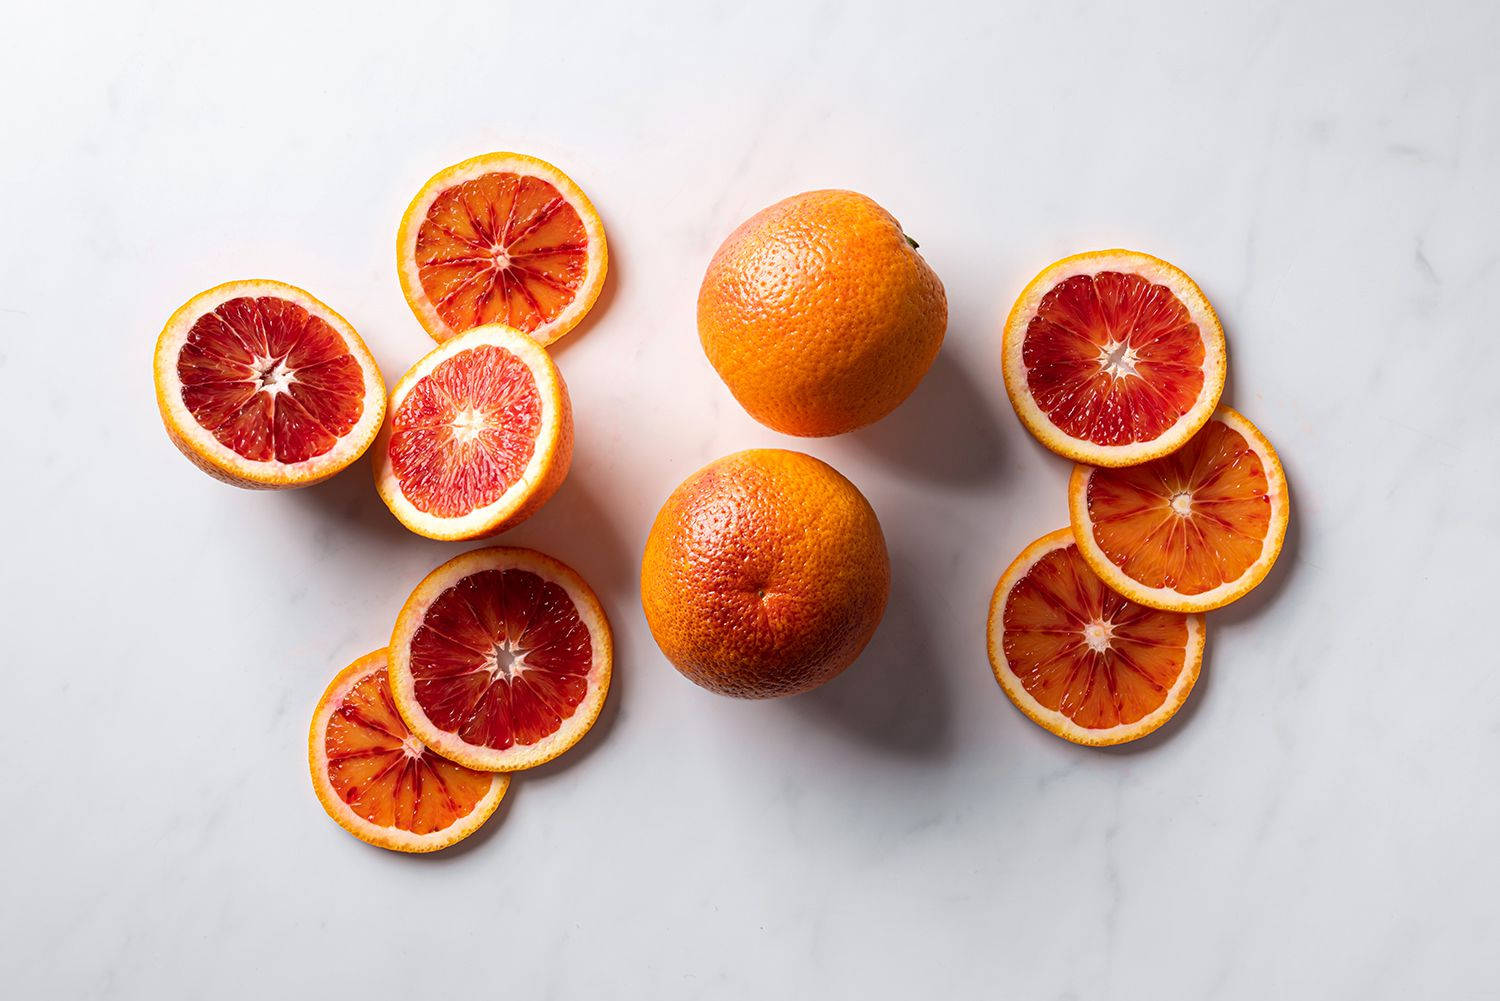 It's a citrus-y delight with these orange models